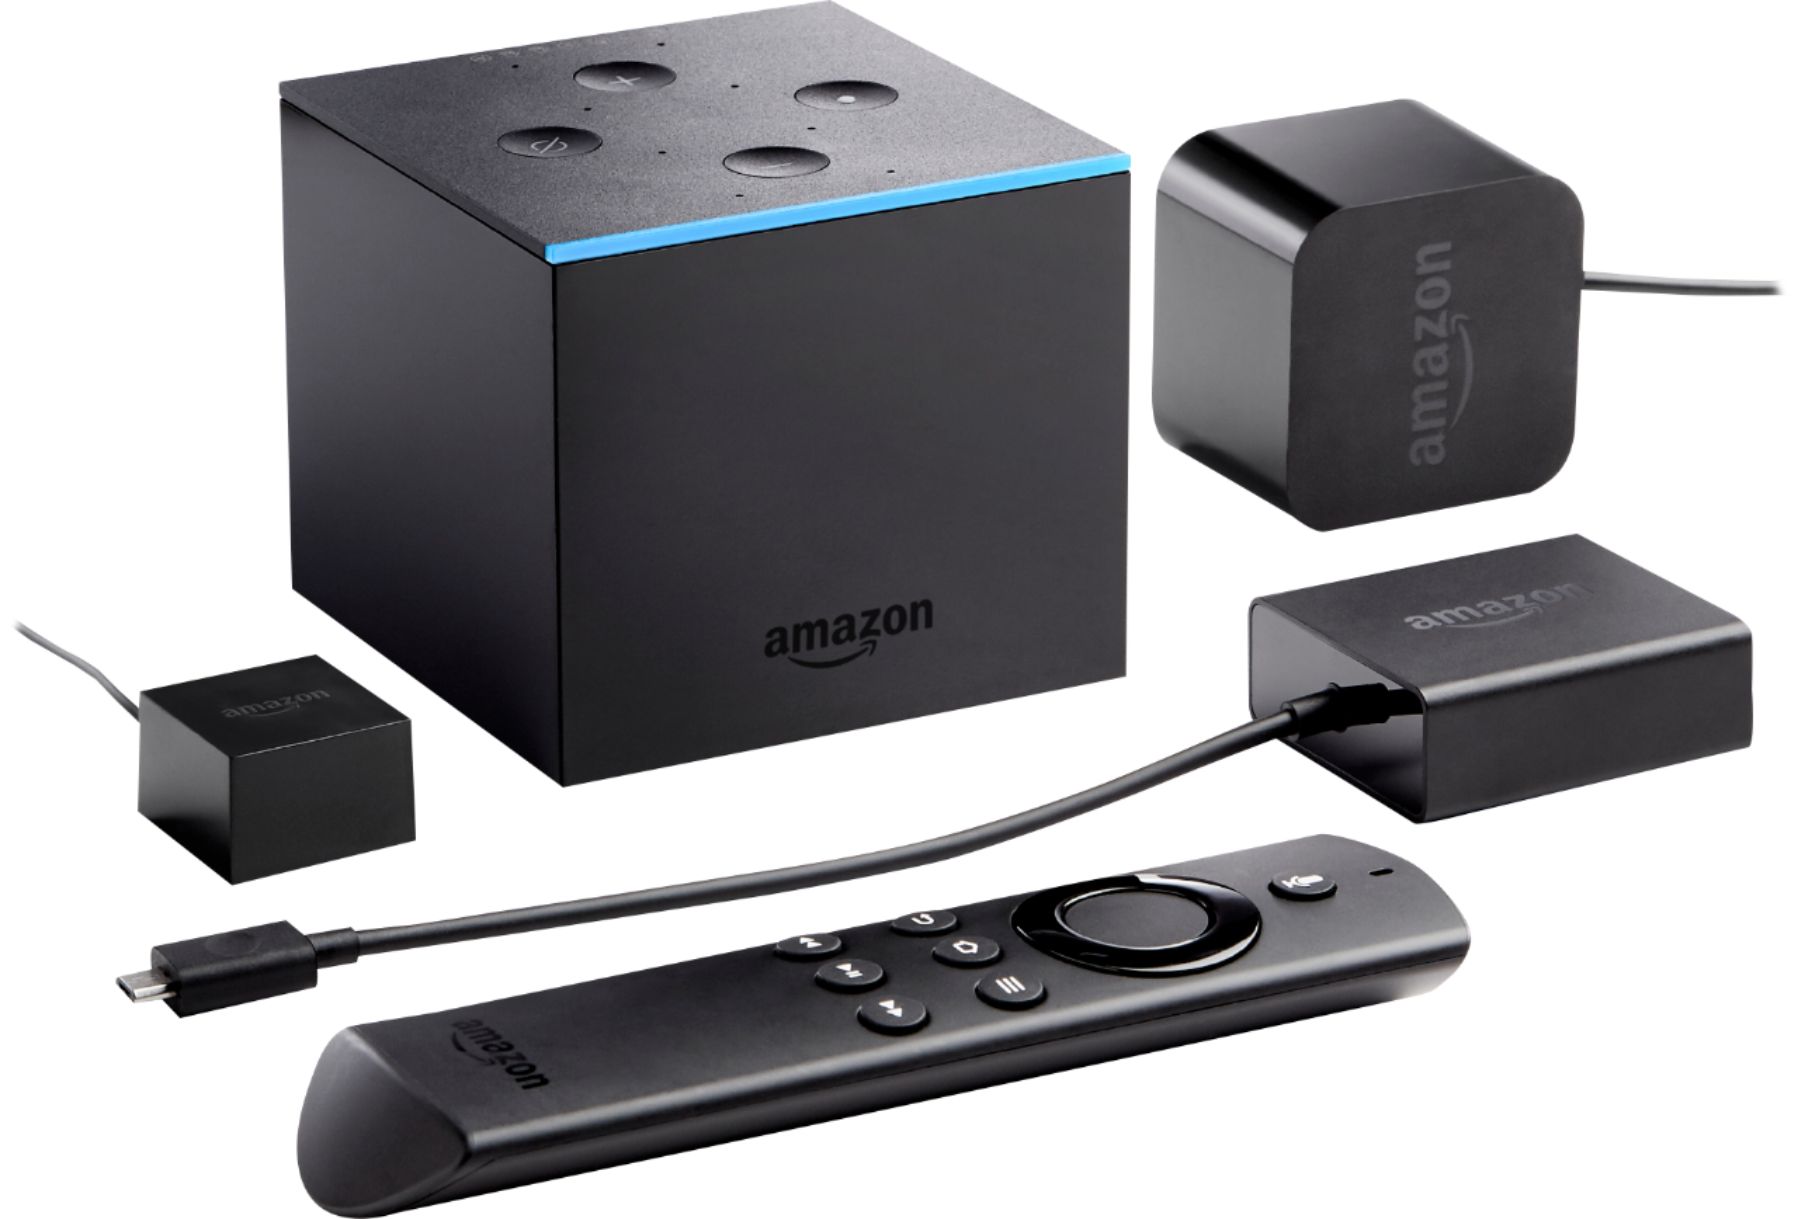 Best Buy: Amazon Fire TV Cube: Hands-Free Streaming Media Player